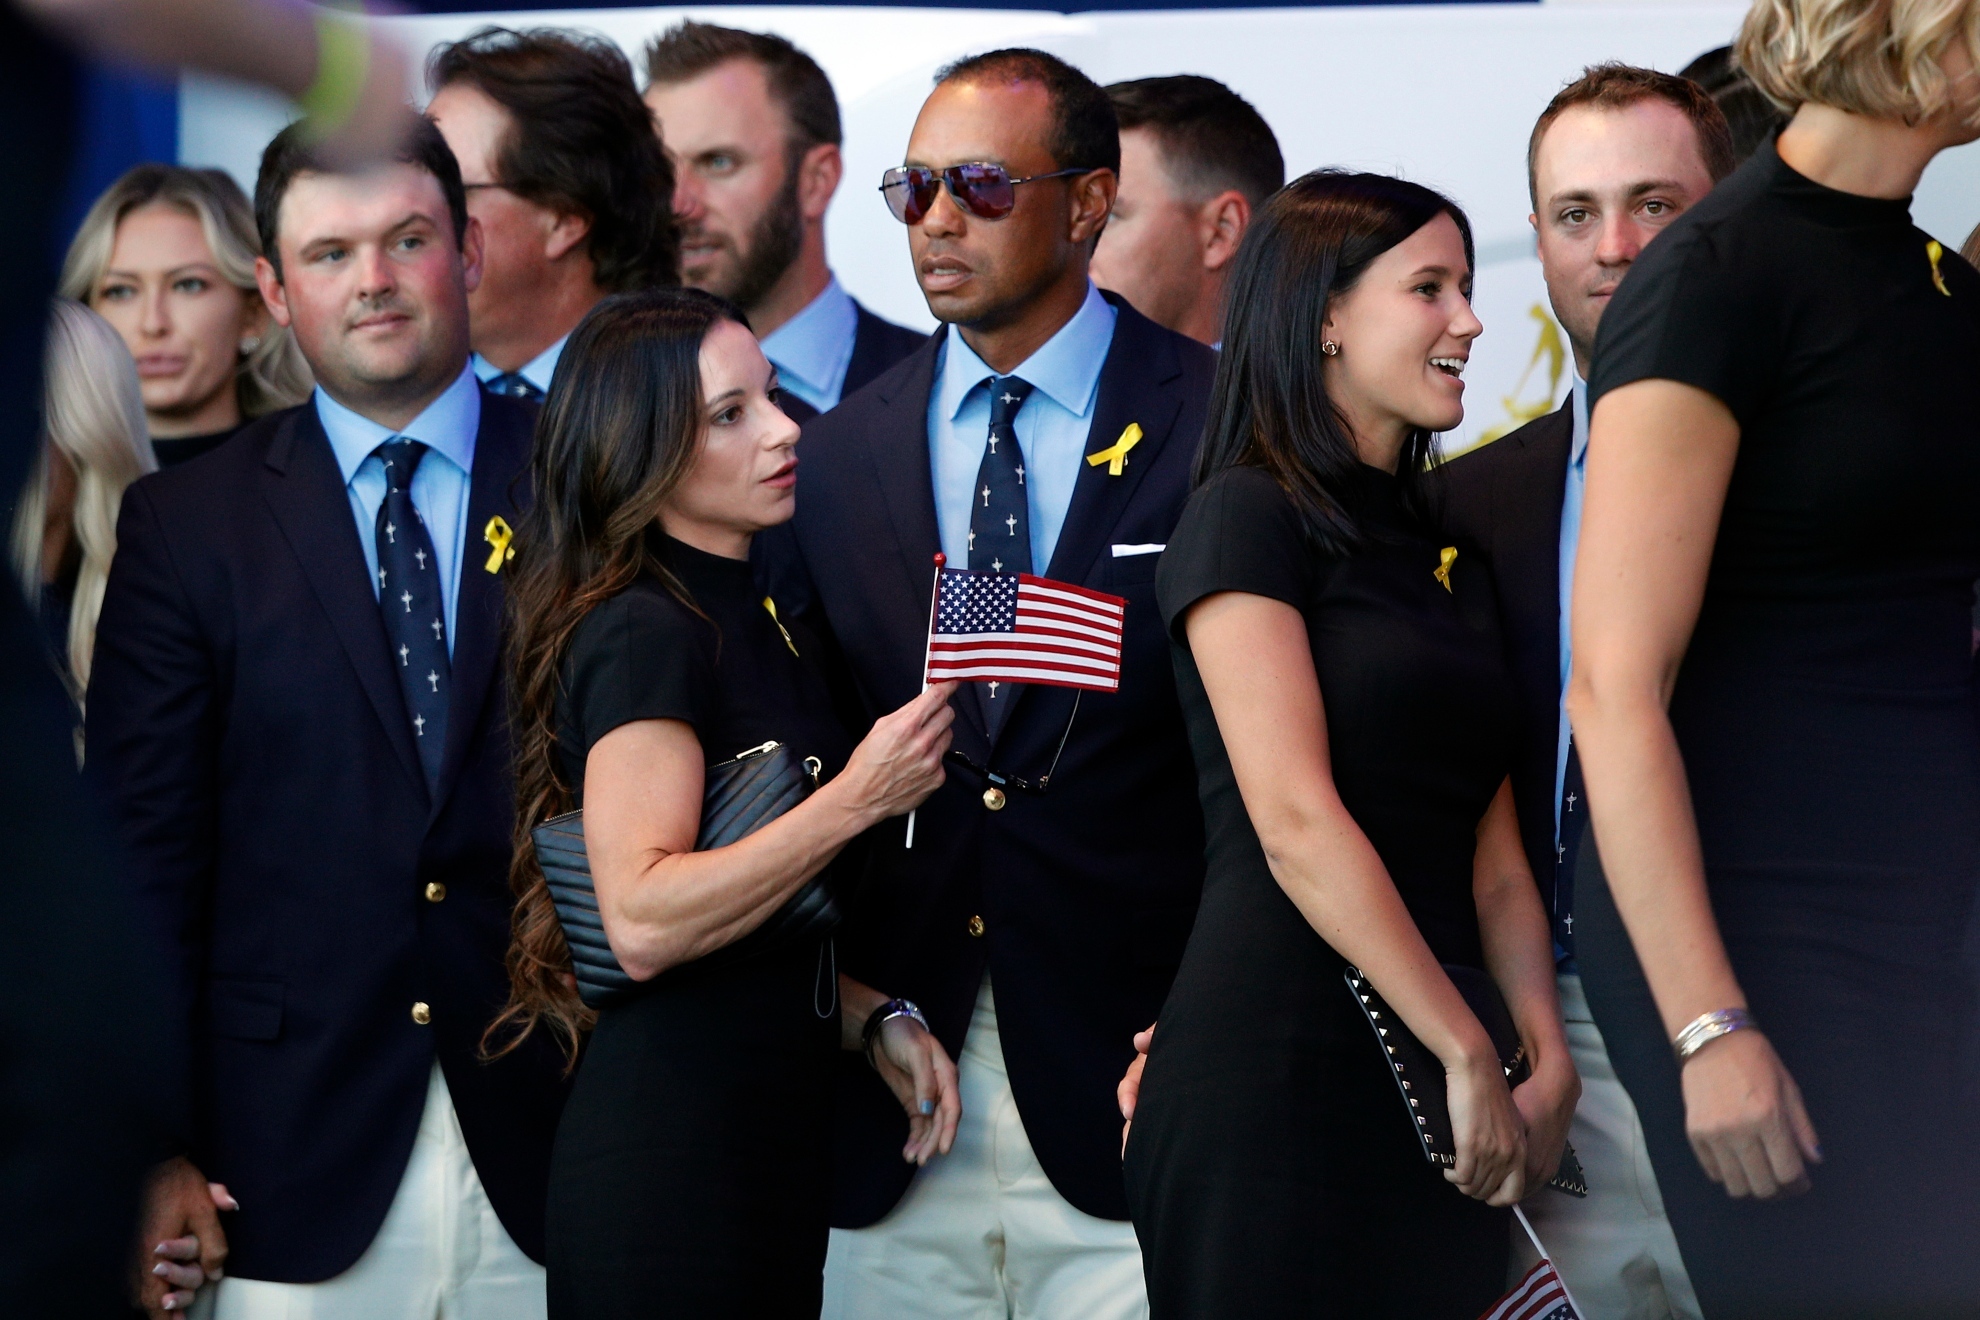 Image of Tiger Woods and Erica Herman